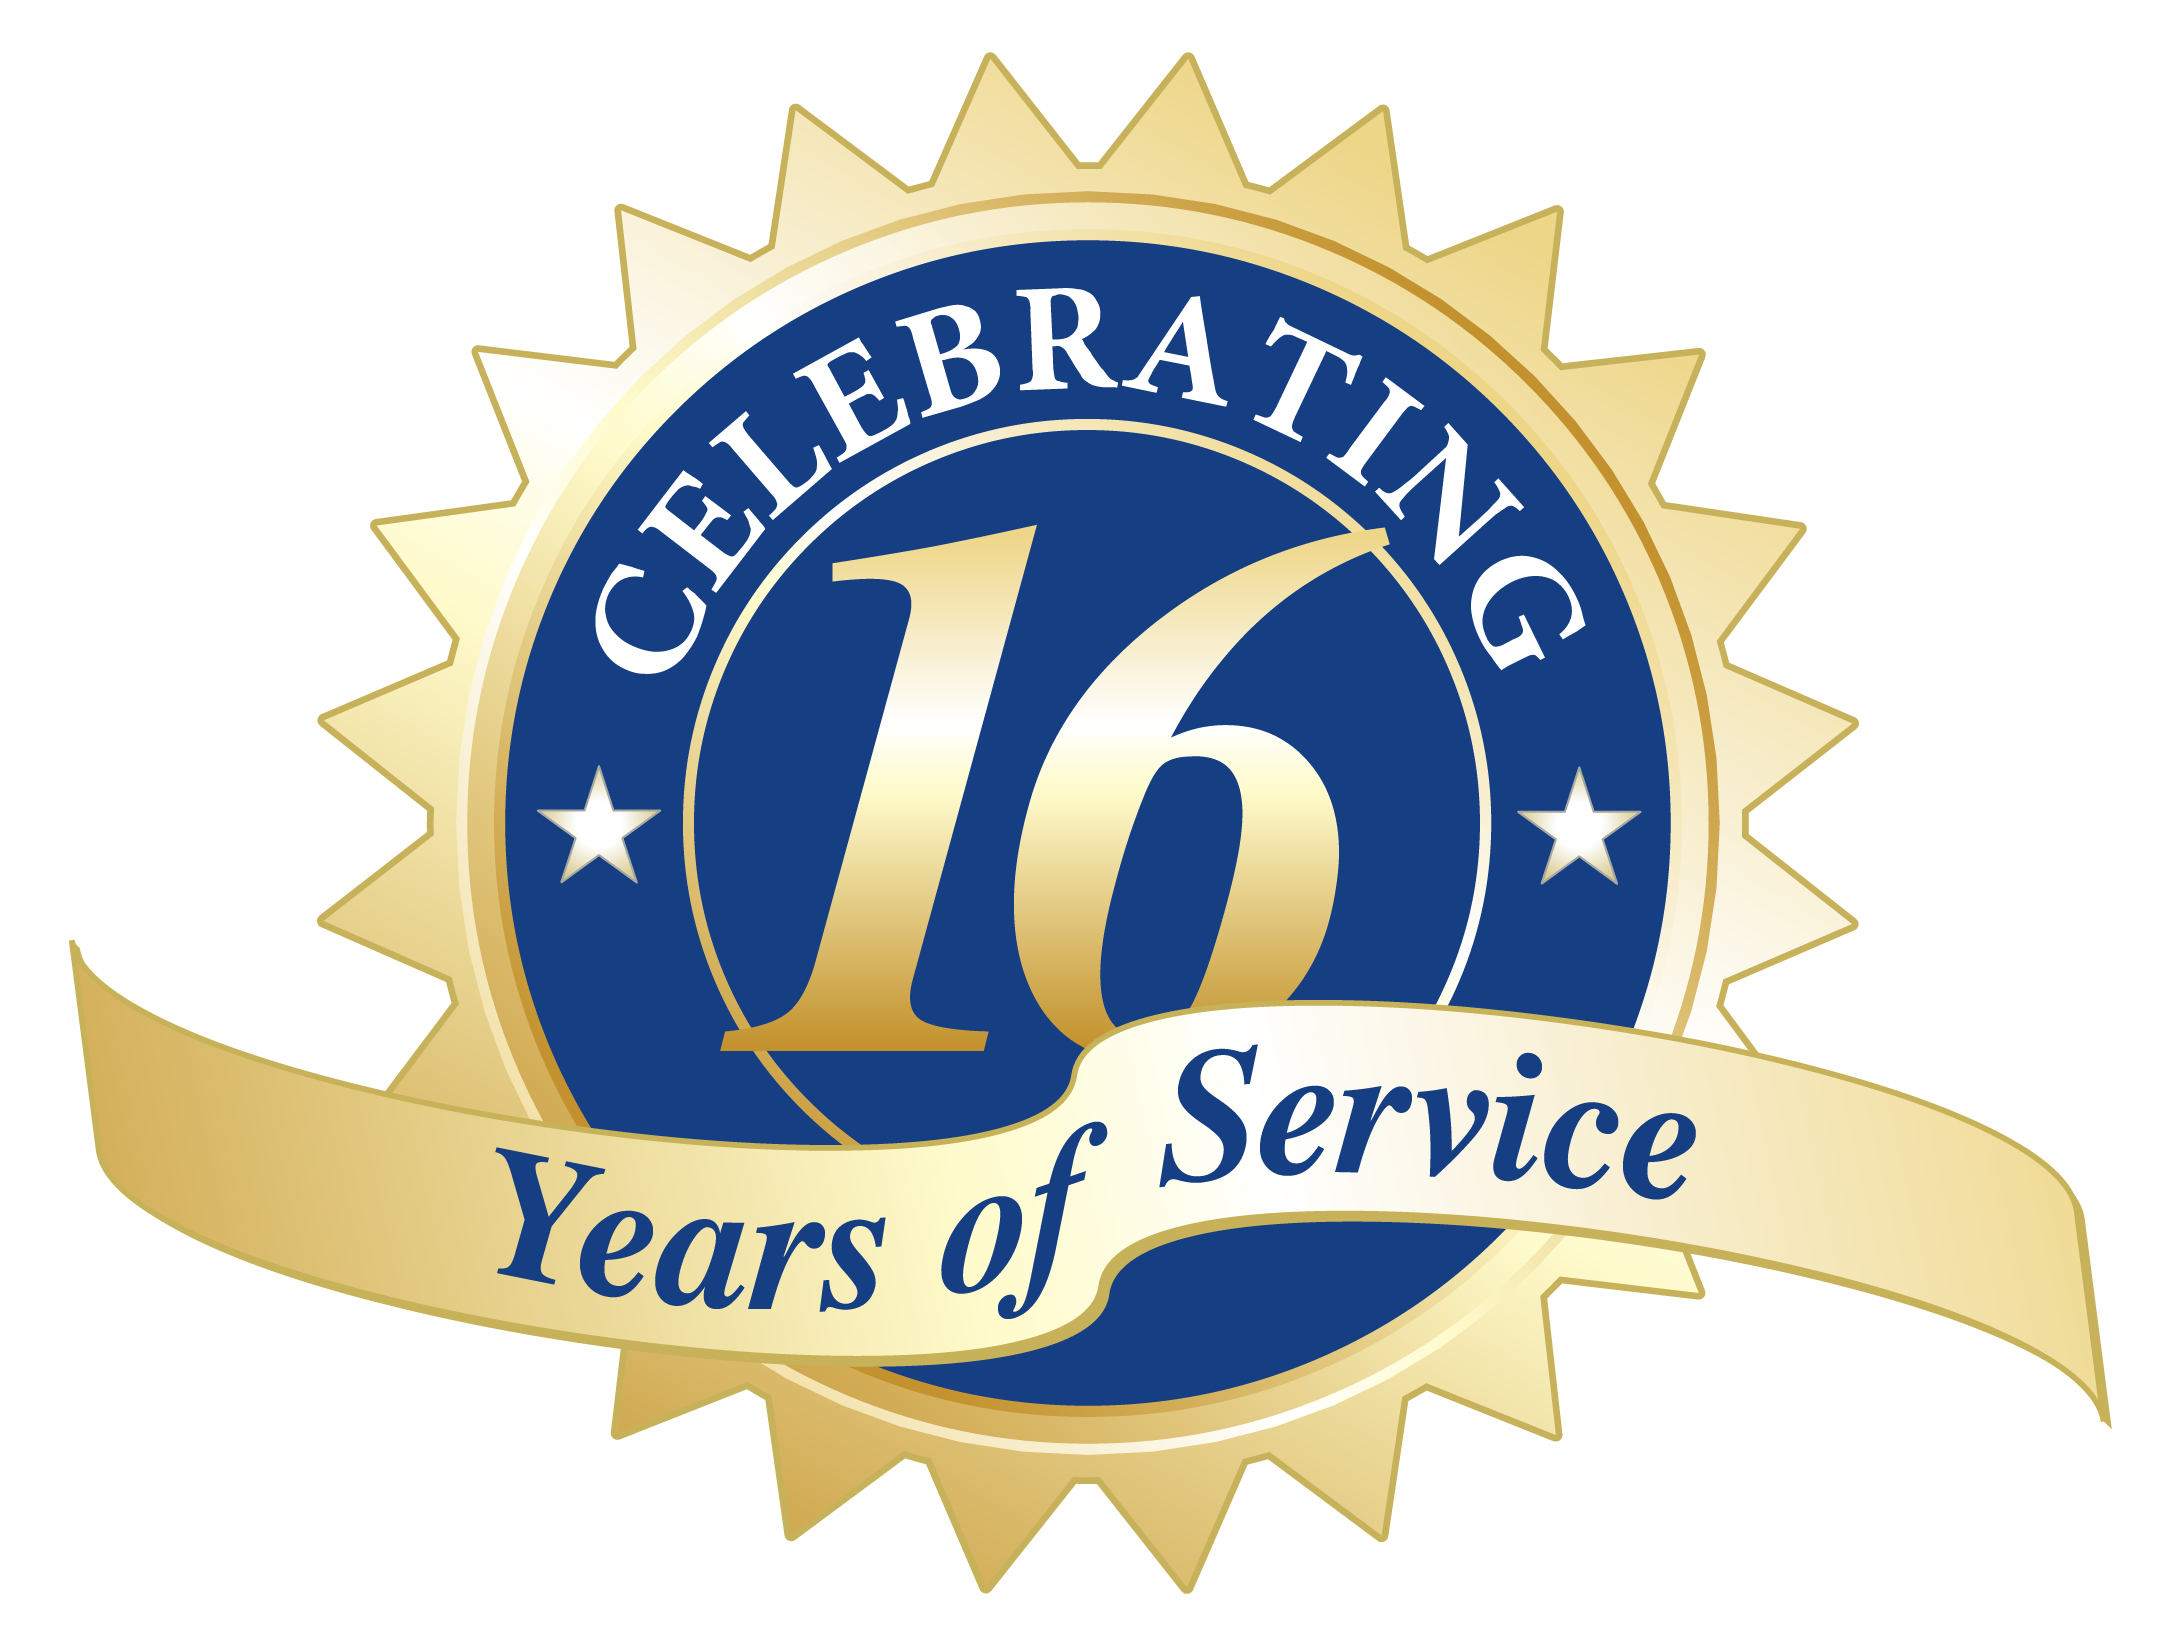 Years of Service by Creative Signs